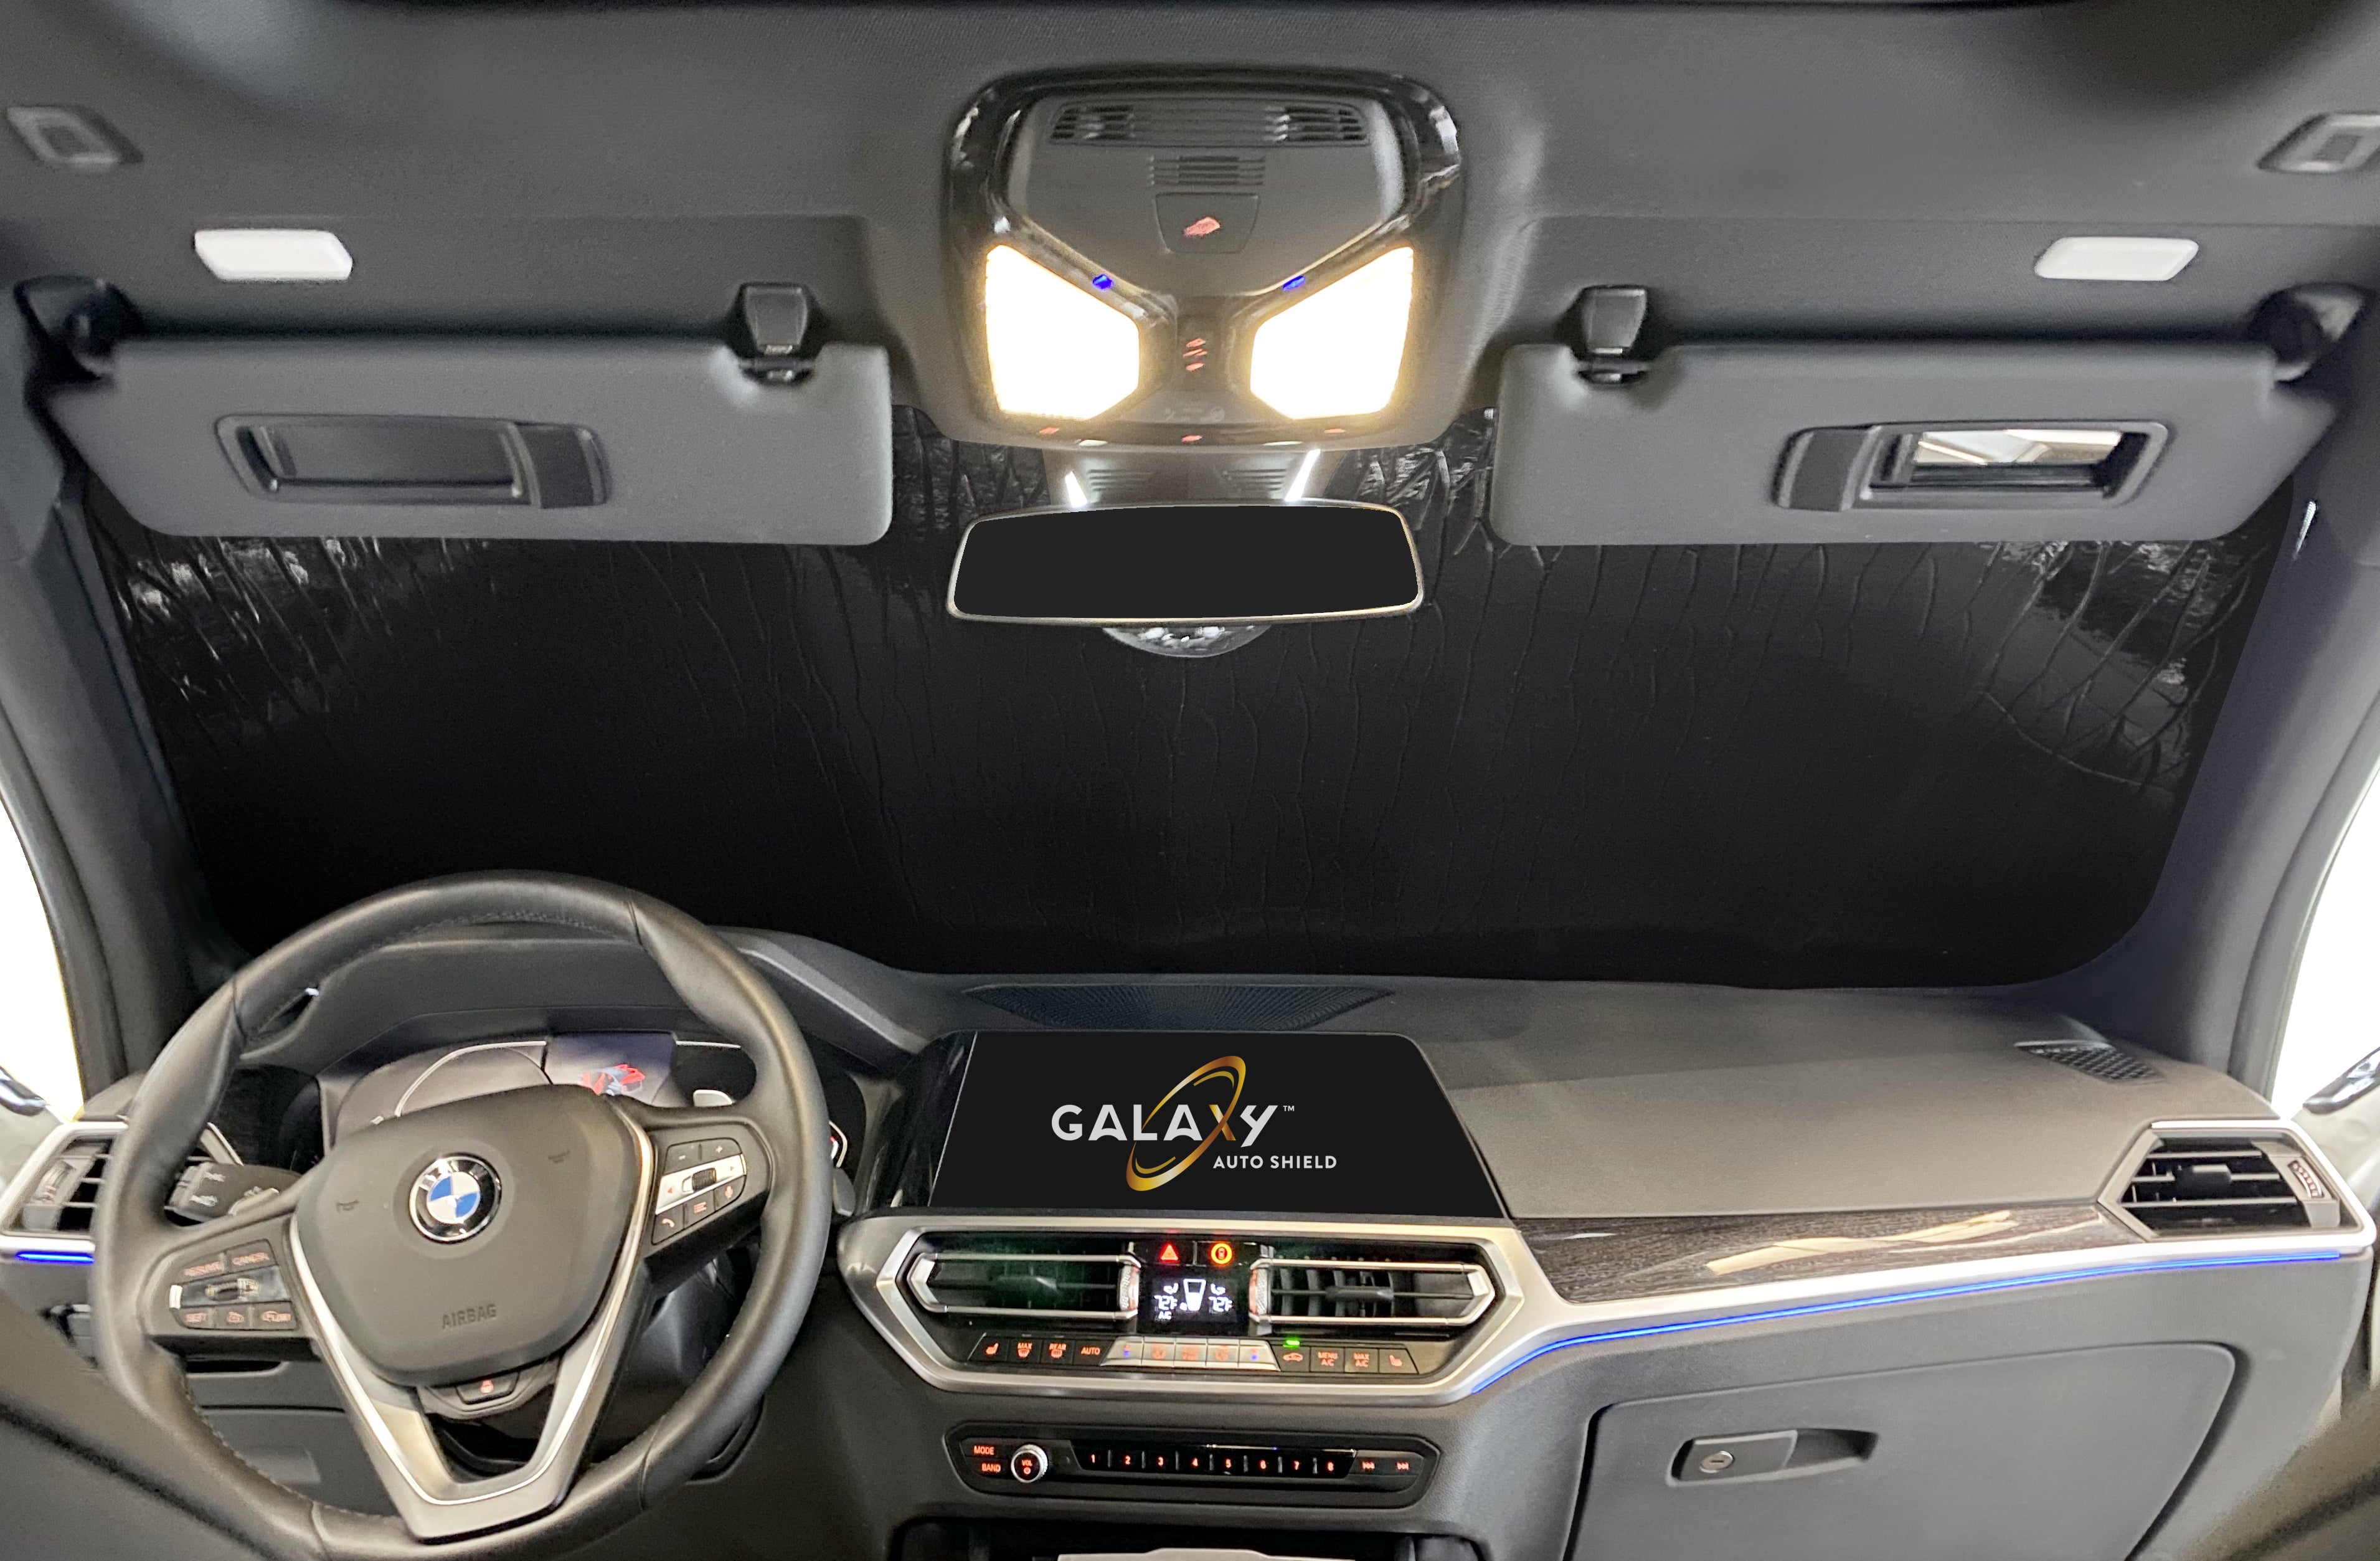 Sunshades for 2019-2024 BMW 3-Series Sedan - 330i Luxury, Sport Line, M Sport, M340i (View for more options)